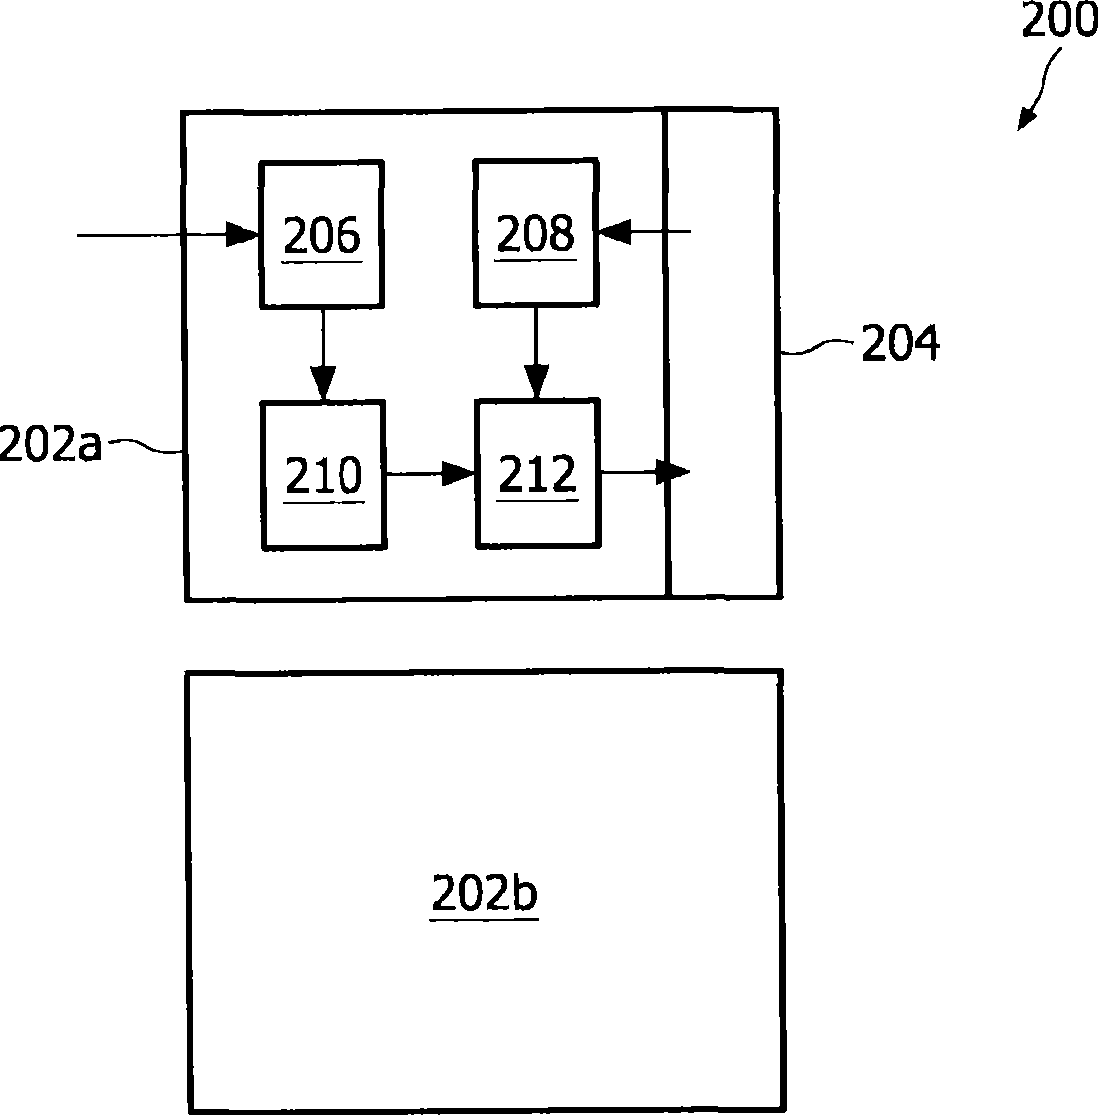 Operating solid-state lighting elements